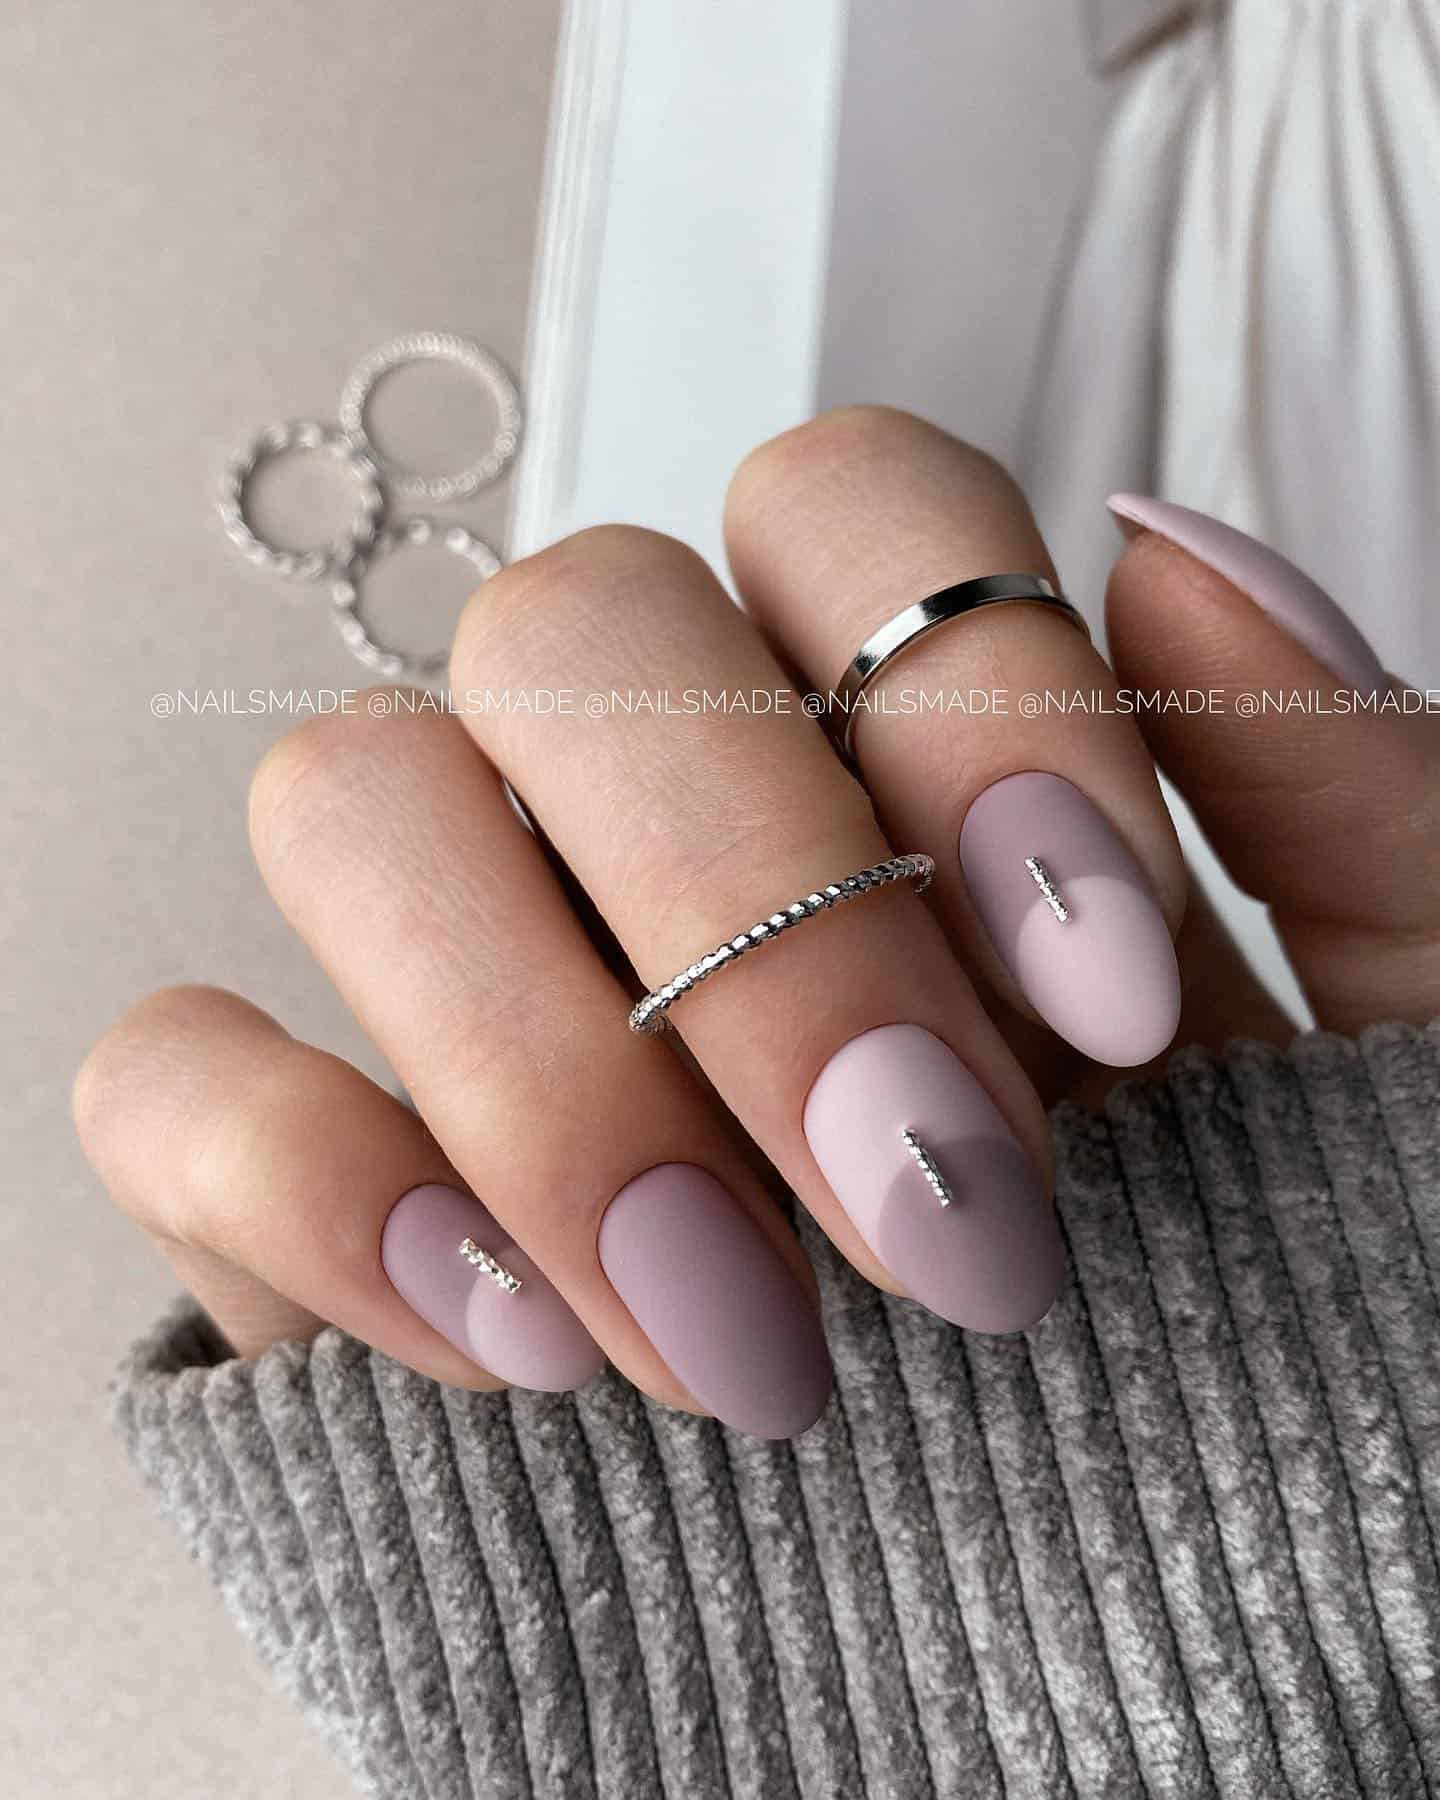 Short, rounded matte mauve manicure. Three nails have light and dark mauve details. Those nails also have gemstones in the middle.